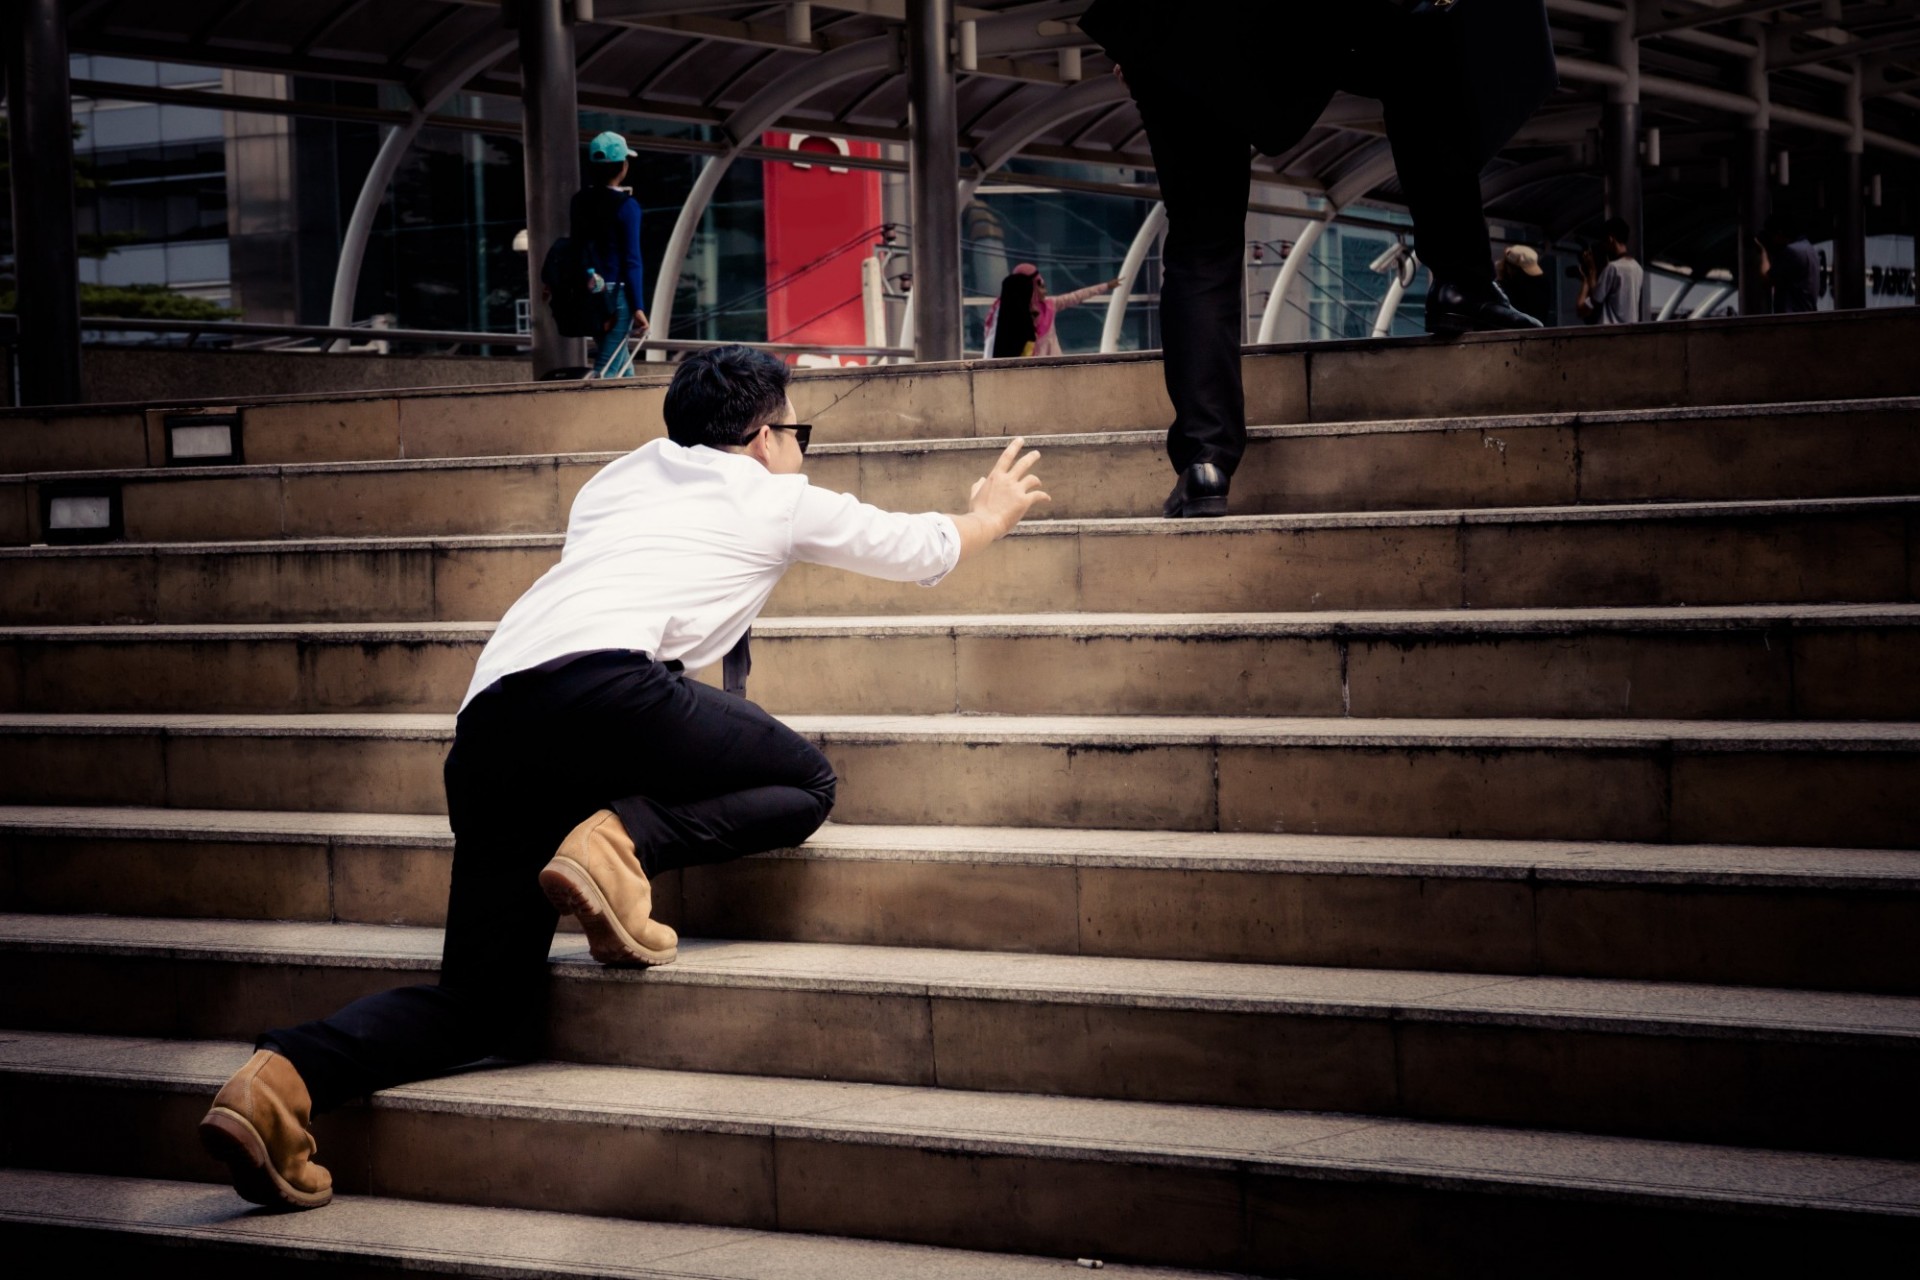 man dressed with white shirt crawling up a staircase and trying to catch up with others